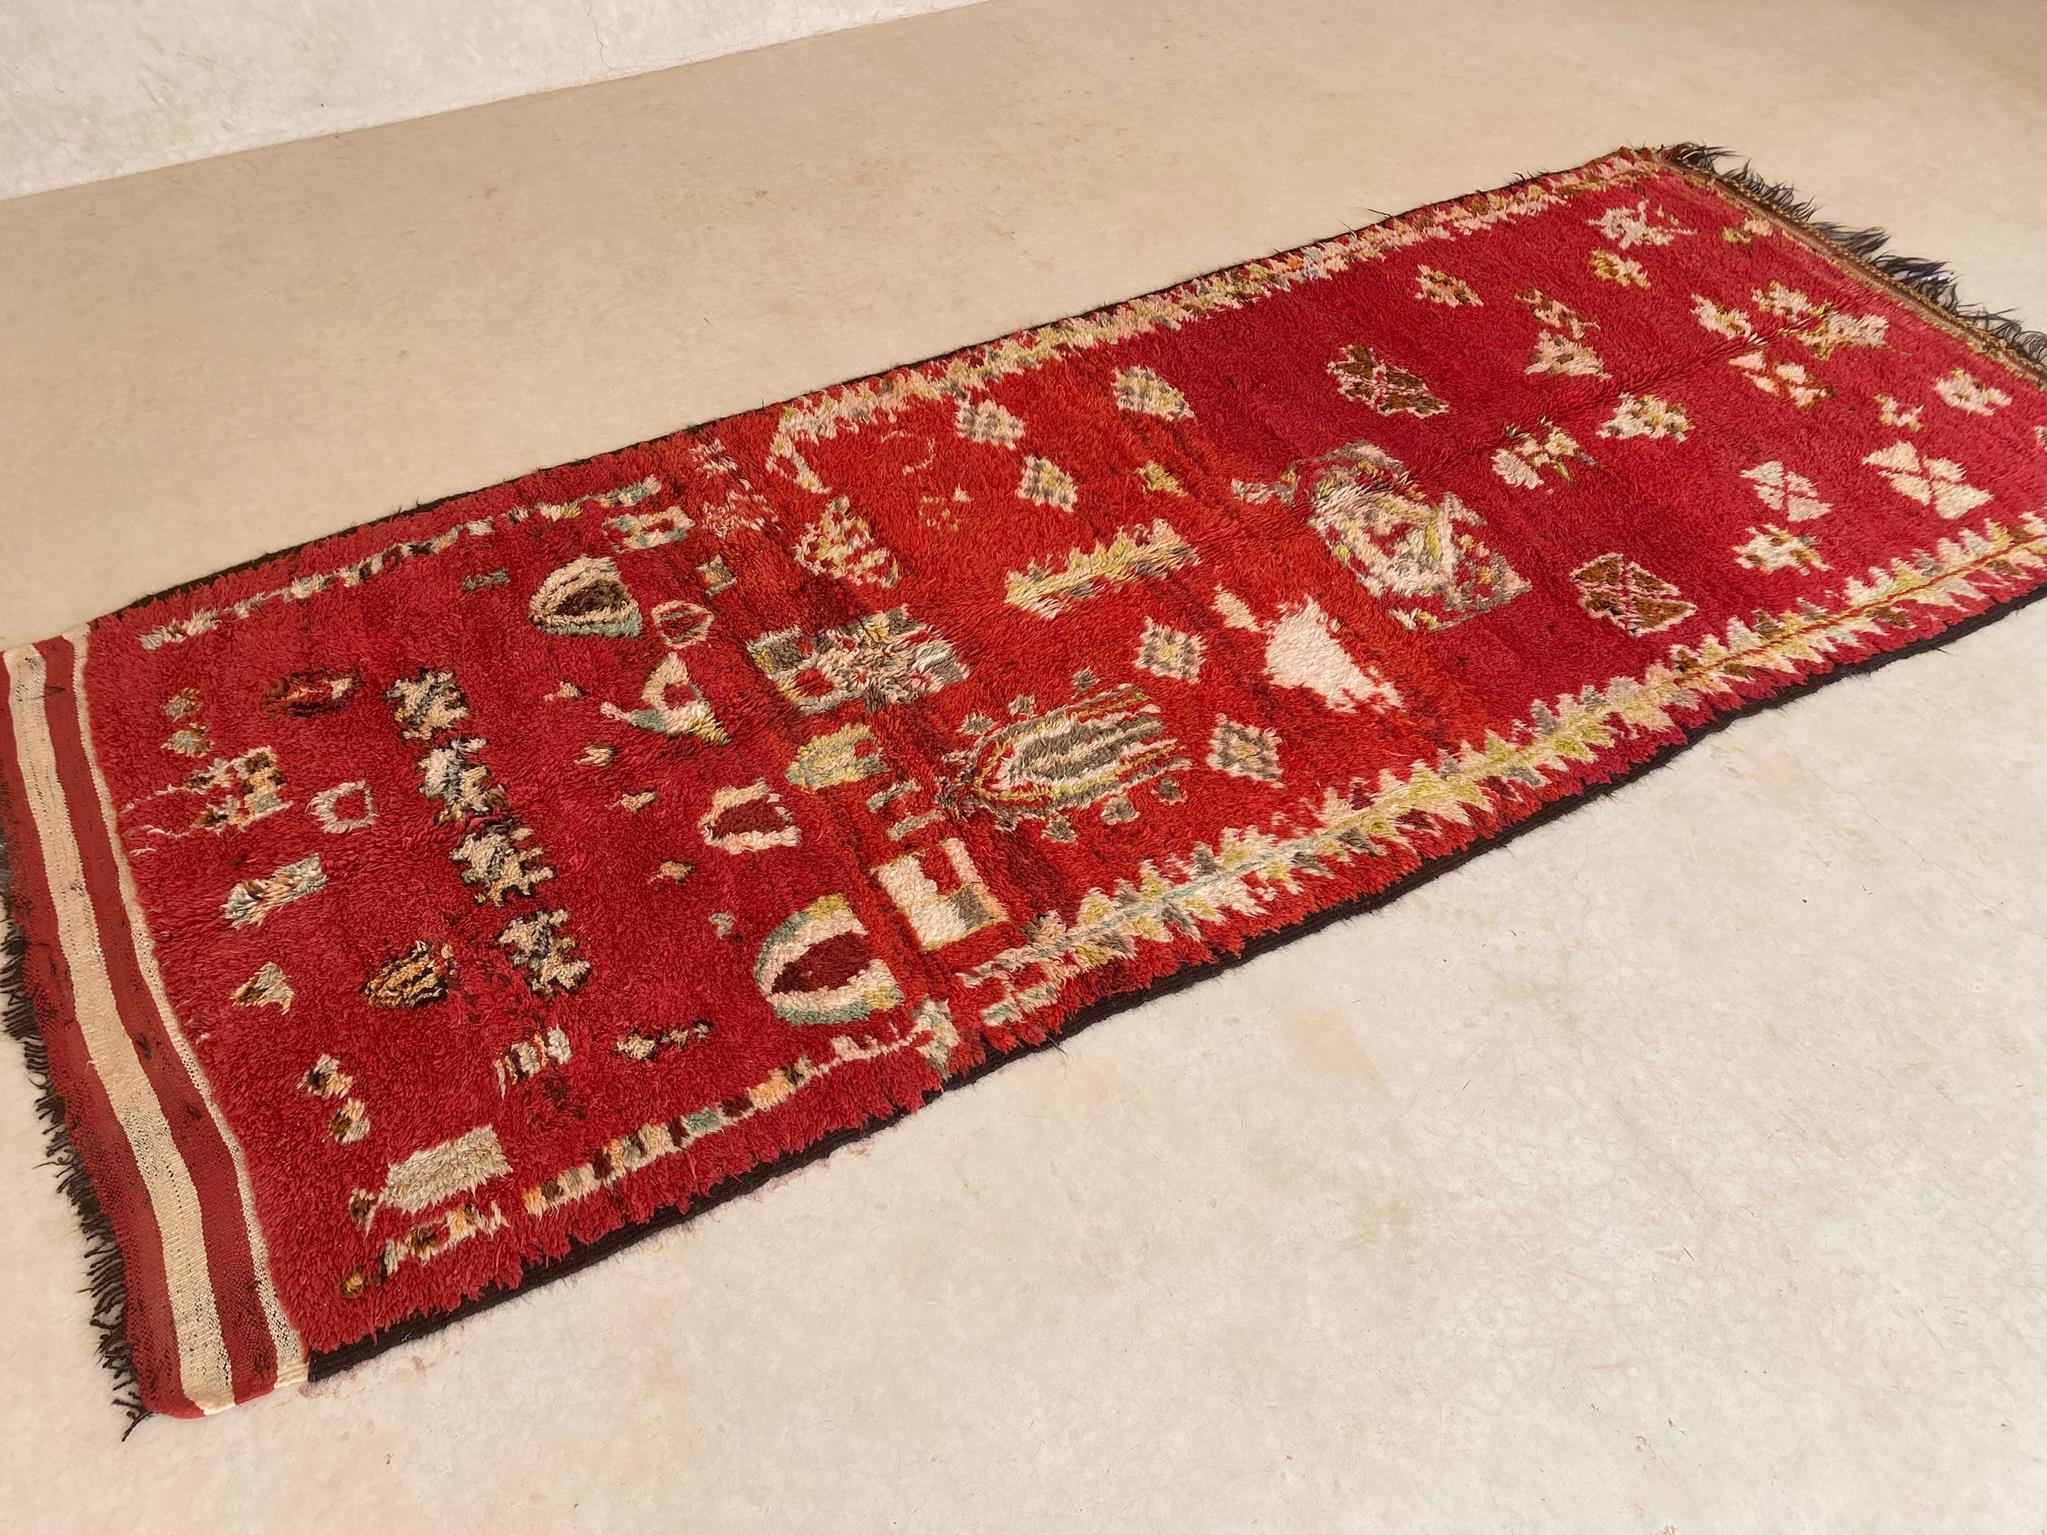 Vintage Moroccan Rehamna rug - Red - 5.1x12.5feet / 156x382cm In Good Condition For Sale In Marrakech, MA